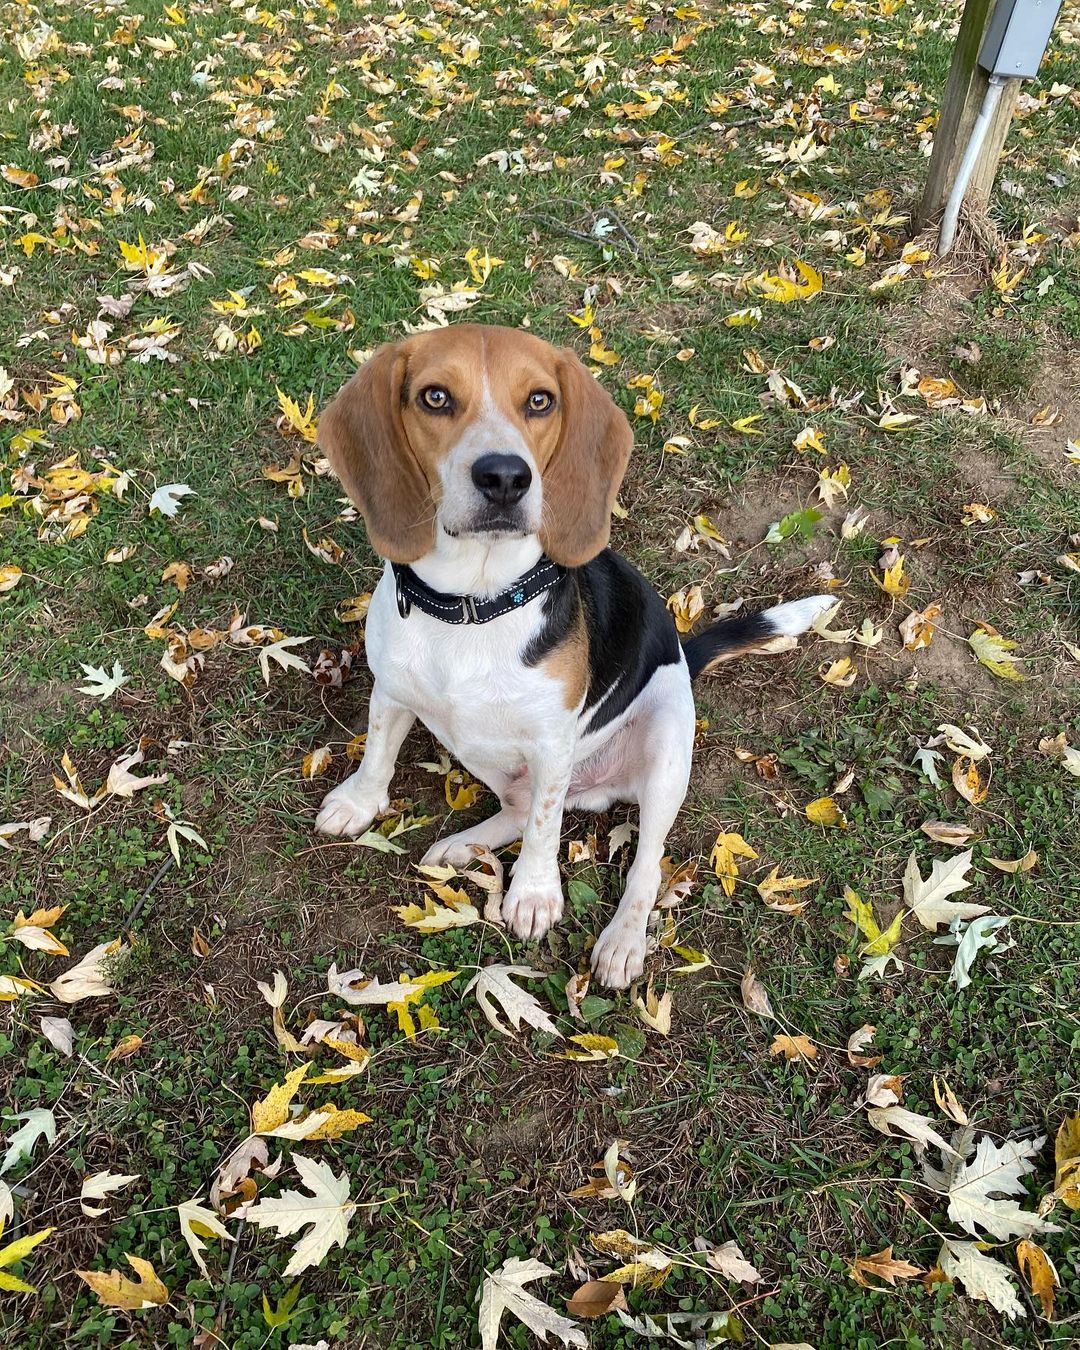 Adopt Copper!!🍂

Copper is a 2-year-old, 26 pound Beagle.  Copper is considered special needs. He requires daily medication. He would do best in a household where someone can keep him in a routine!

Copper plays and behaves like a playful puppy.   He is very affectionate and friendly to everyone he meets. 

Copper is  crate trained and does well on leash.  

It  is required that Copper go to a home with a fenced in grassy yard! He loves being able to run around and play ball. 

If you are interested in adopting Copper please fill out an application at oneloveanimalrescue.org to be considered.

<a target='_blank' href='https://www.instagram.com/explore/tags/StrayDog/'>#StrayDog</a> <a target='_blank' href='https://www.instagram.com/explore/tags/BeaglesOfInstagram/'>#BeaglesOfInstagram</a> <a target='_blank' href='https://www.instagram.com/explore/tags/Beagle/'>#Beagle</a> <a target='_blank' href='https://www.instagram.com/explore/tags/BeagleLife/'>#BeagleLife</a>  <a target='_blank' href='https://www.instagram.com/explore/tags/OneLoveAnimalRescue/'>#OneLoveAnimalRescue</a> <a target='_blank' href='https://www.instagram.com/explore/tags/Adopt/'>#Adopt</a> <a target='_blank' href='https://www.instagram.com/explore/tags/AdoptDontShop/'>#AdoptDontShop</a> <a target='_blank' href='https://www.instagram.com/explore/tags/Adoption/'>#Adoption</a> <a target='_blank' href='https://www.instagram.com/explore/tags/AdoptDogs/'>#AdoptDogs</a> <a target='_blank' href='https://www.instagram.com/explore/tags/AdoptDontBuy/'>#AdoptDontBuy</a> <a target='_blank' href='https://www.instagram.com/explore/tags/AdoptDontBreed/'>#AdoptDontBreed</a> <a target='_blank' href='https://www.instagram.com/explore/tags/SpecialNeeds/'>#SpecialNeeds</a> <a target='_blank' href='https://www.instagram.com/explore/tags/RescueDog/'>#RescueDog</a> <a target='_blank' href='https://www.instagram.com/explore/tags/BeaglesRock/'>#BeaglesRock</a>  <a target='_blank' href='https://www.instagram.com/explore/tags/Rescued/'>#Rescued</a> <a target='_blank' href='https://www.instagram.com/explore/tags/RescuePuppy/'>#RescuePuppy</a> <a target='_blank' href='https://www.instagram.com/explore/tags/RescueDogsRule/'>#RescueDogsRule</a> <a target='_blank' href='https://www.instagram.com/explore/tags/SJRAS/'>#SJRAS</a> <a target='_blank' href='https://www.instagram.com/explore/tags/RescueDogsOfIG/'>#RescueDogsOfIG</a> <a target='_blank' href='https://www.instagram.com/explore/tags/BeaglesOfInstagram/'>#BeaglesOfInstagram</a> <a target='_blank' href='https://www.instagram.com/explore/tags/Foster/'>#Foster</a> <a target='_blank' href='https://www.instagram.com/explore/tags/FosterDog/'>#FosterDog</a> <a target='_blank' href='https://www.instagram.com/explore/tags/ShelterDog/'>#ShelterDog</a> <a target='_blank' href='https://www.instagram.com/explore/tags/AdoptCopper/'>#AdoptCopper</a>  <a target='_blank' href='https://www.instagram.com/explore/tags/OlarSave/'>#OlarSave</a>